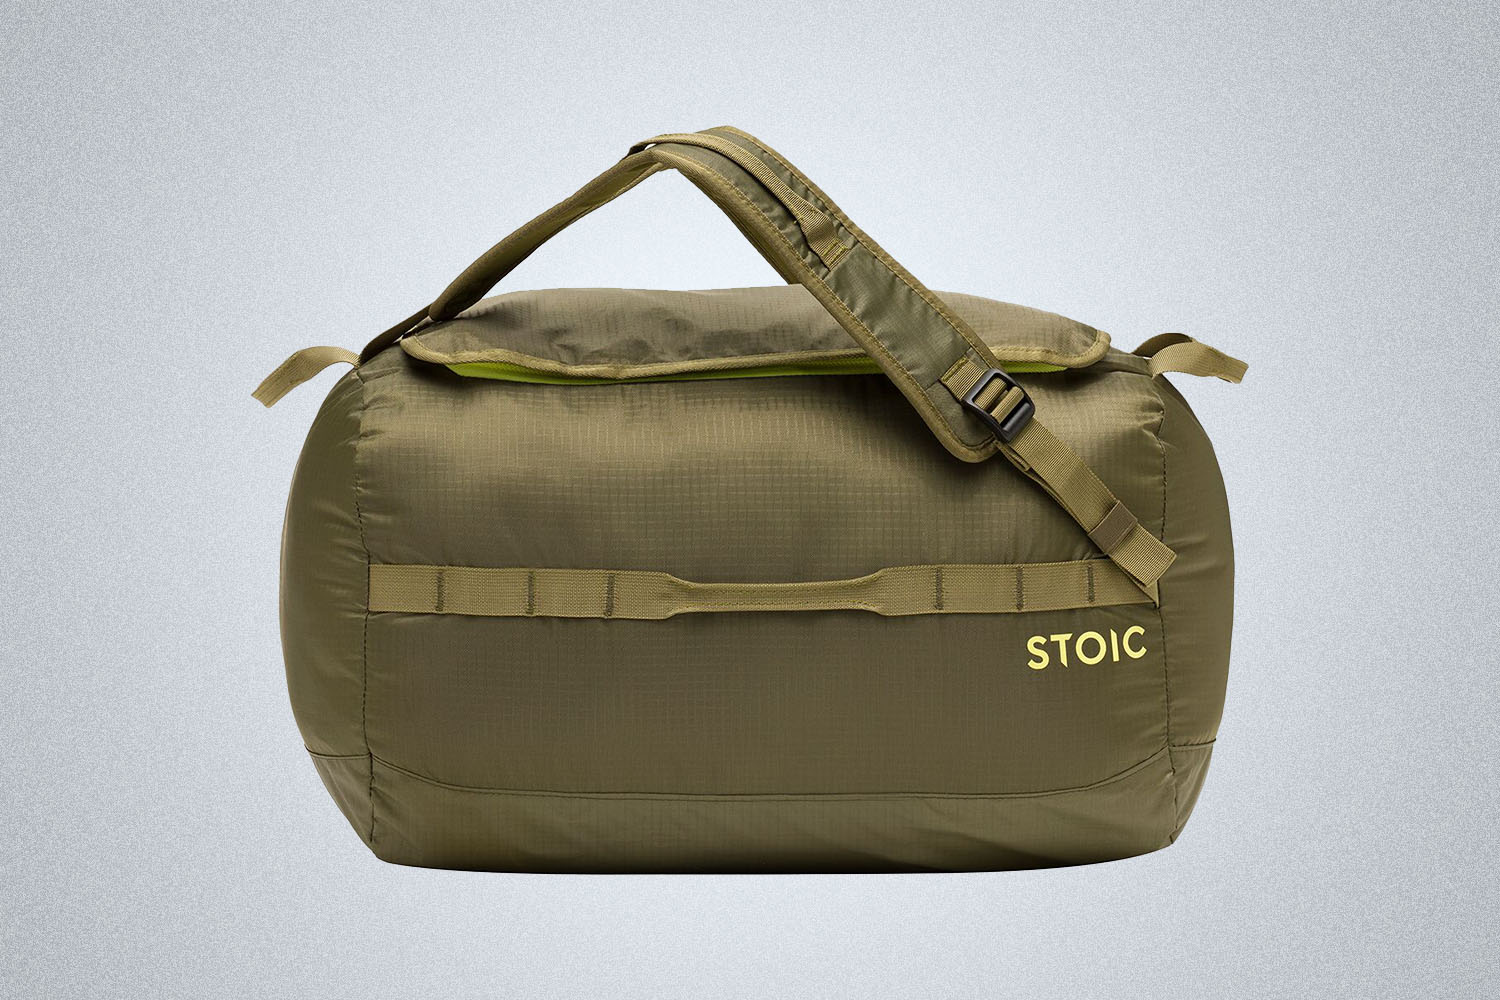 a round green duffle from Stoic on a grey background